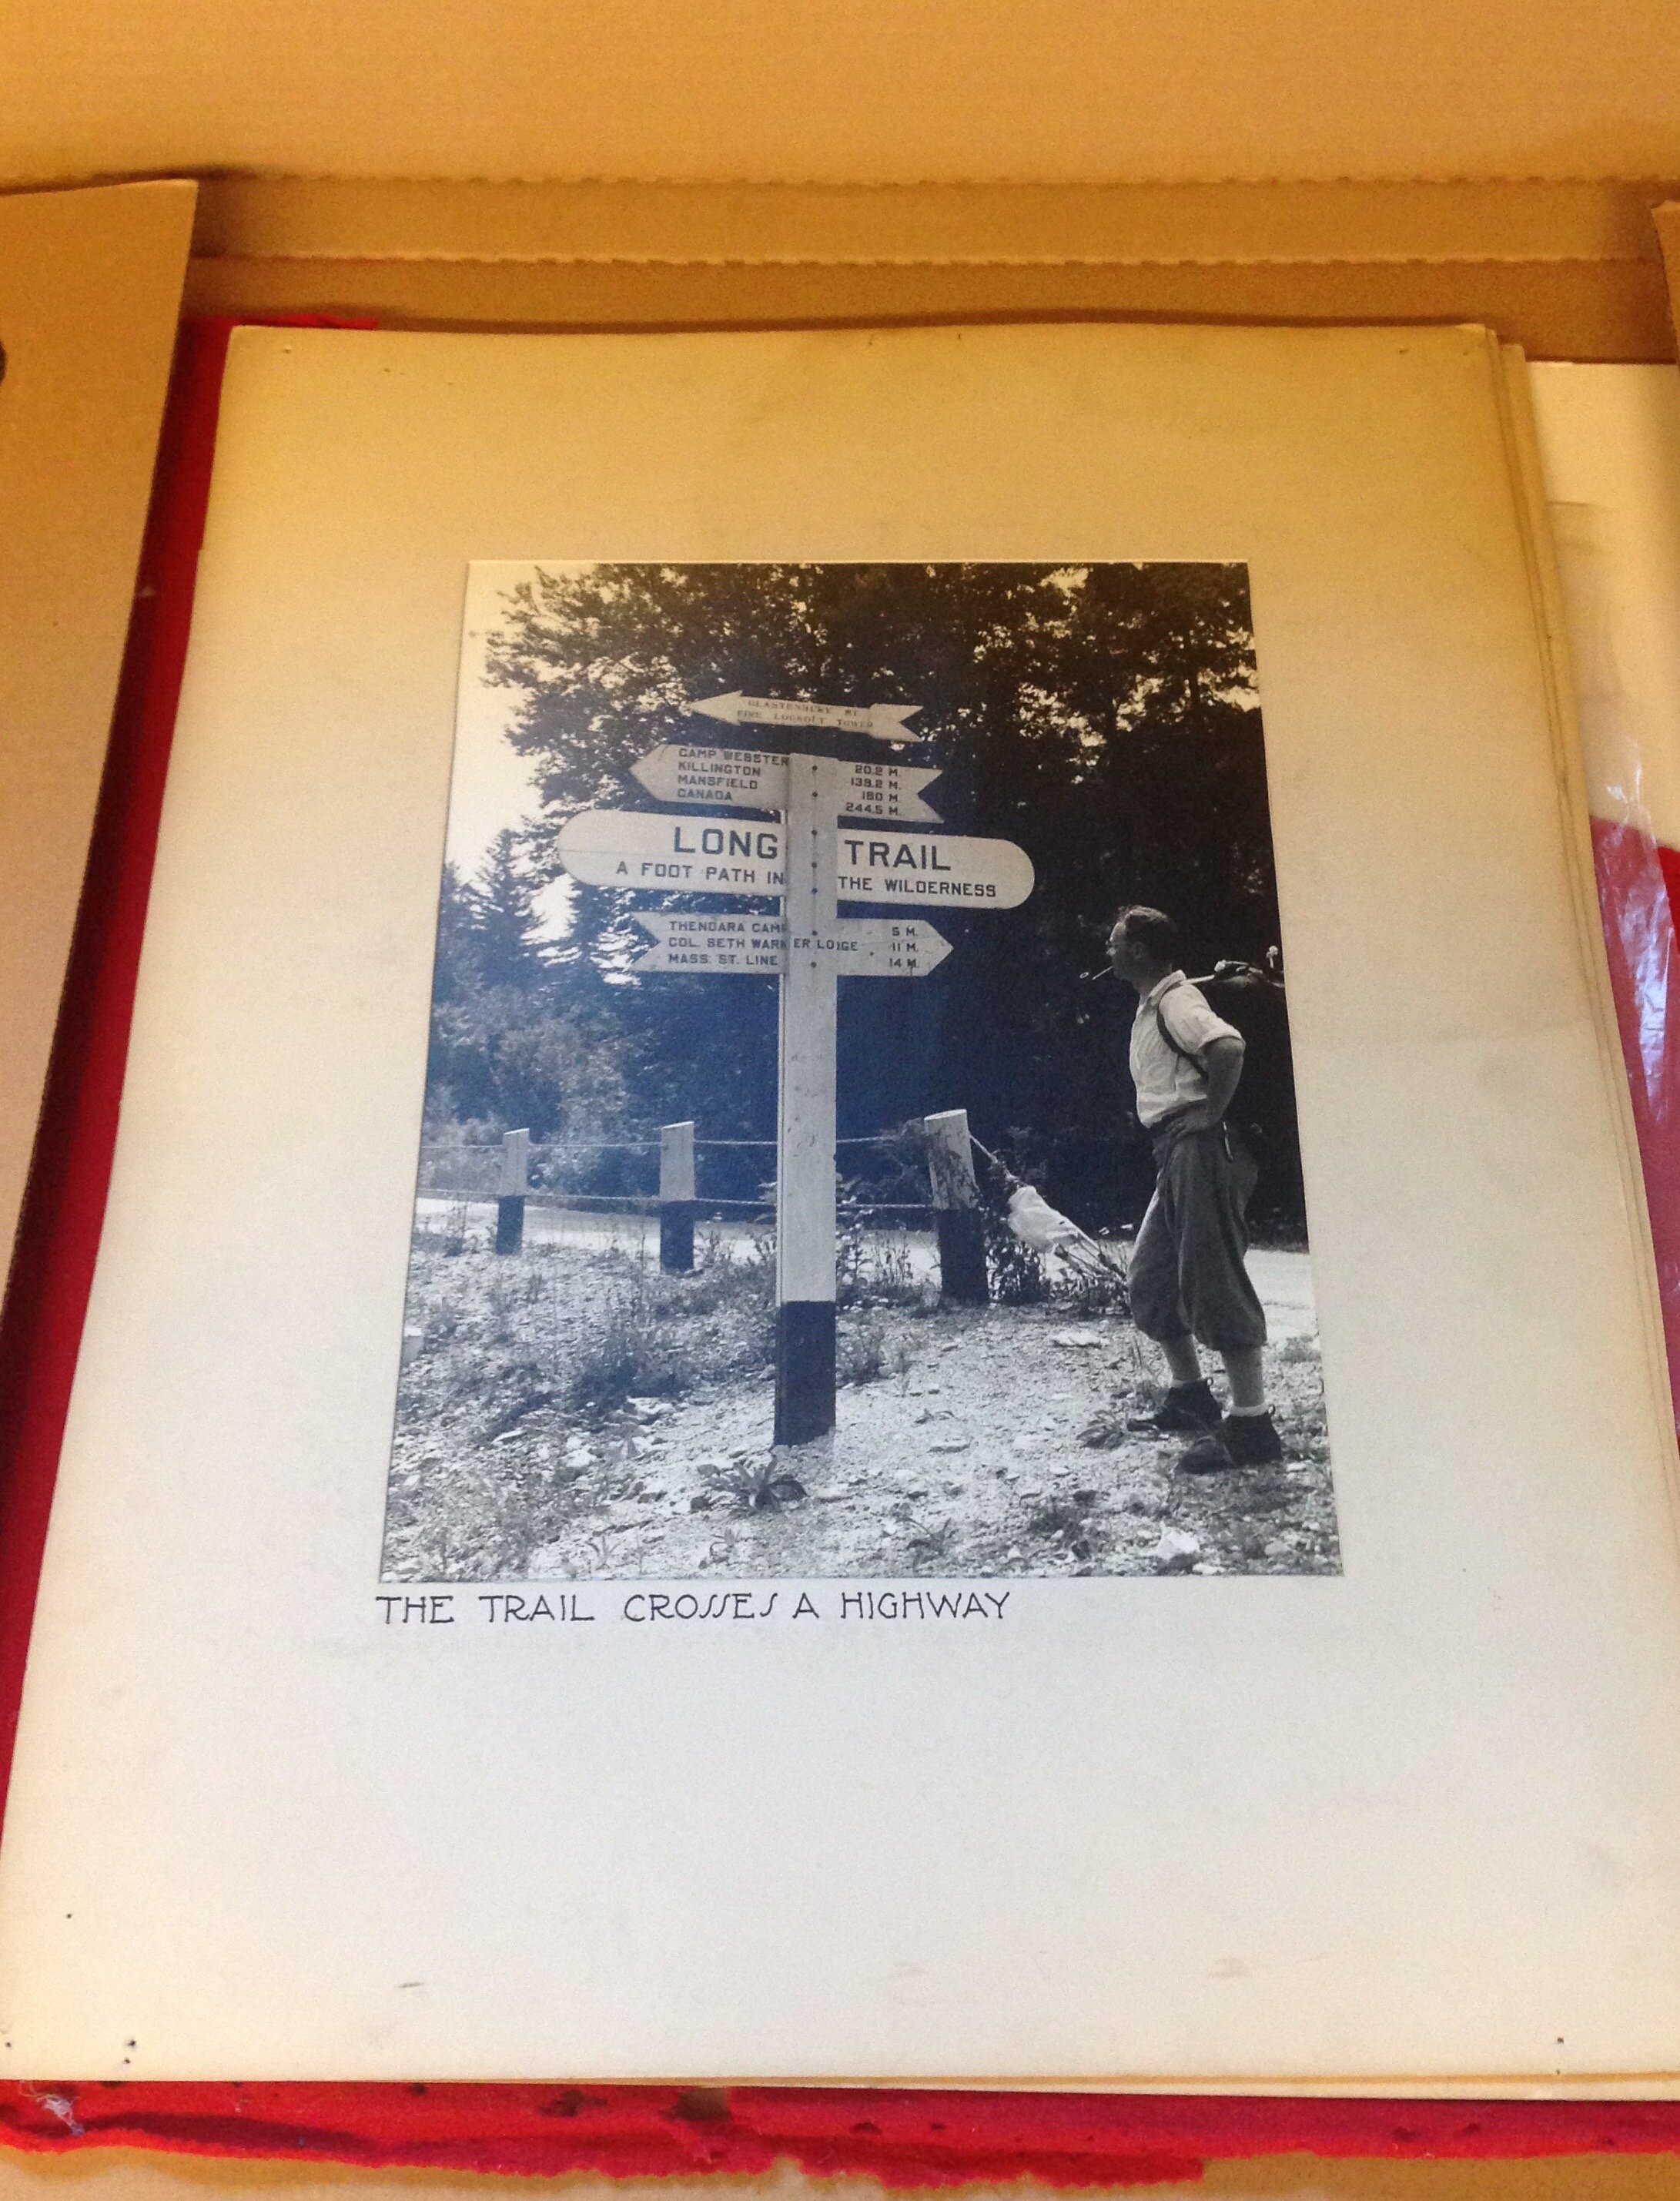   Photographic print of a hiker nearby a Long Trail sign. The caption reads “The Trail Crosses a Highway” (Green Mountain Club Archives).  